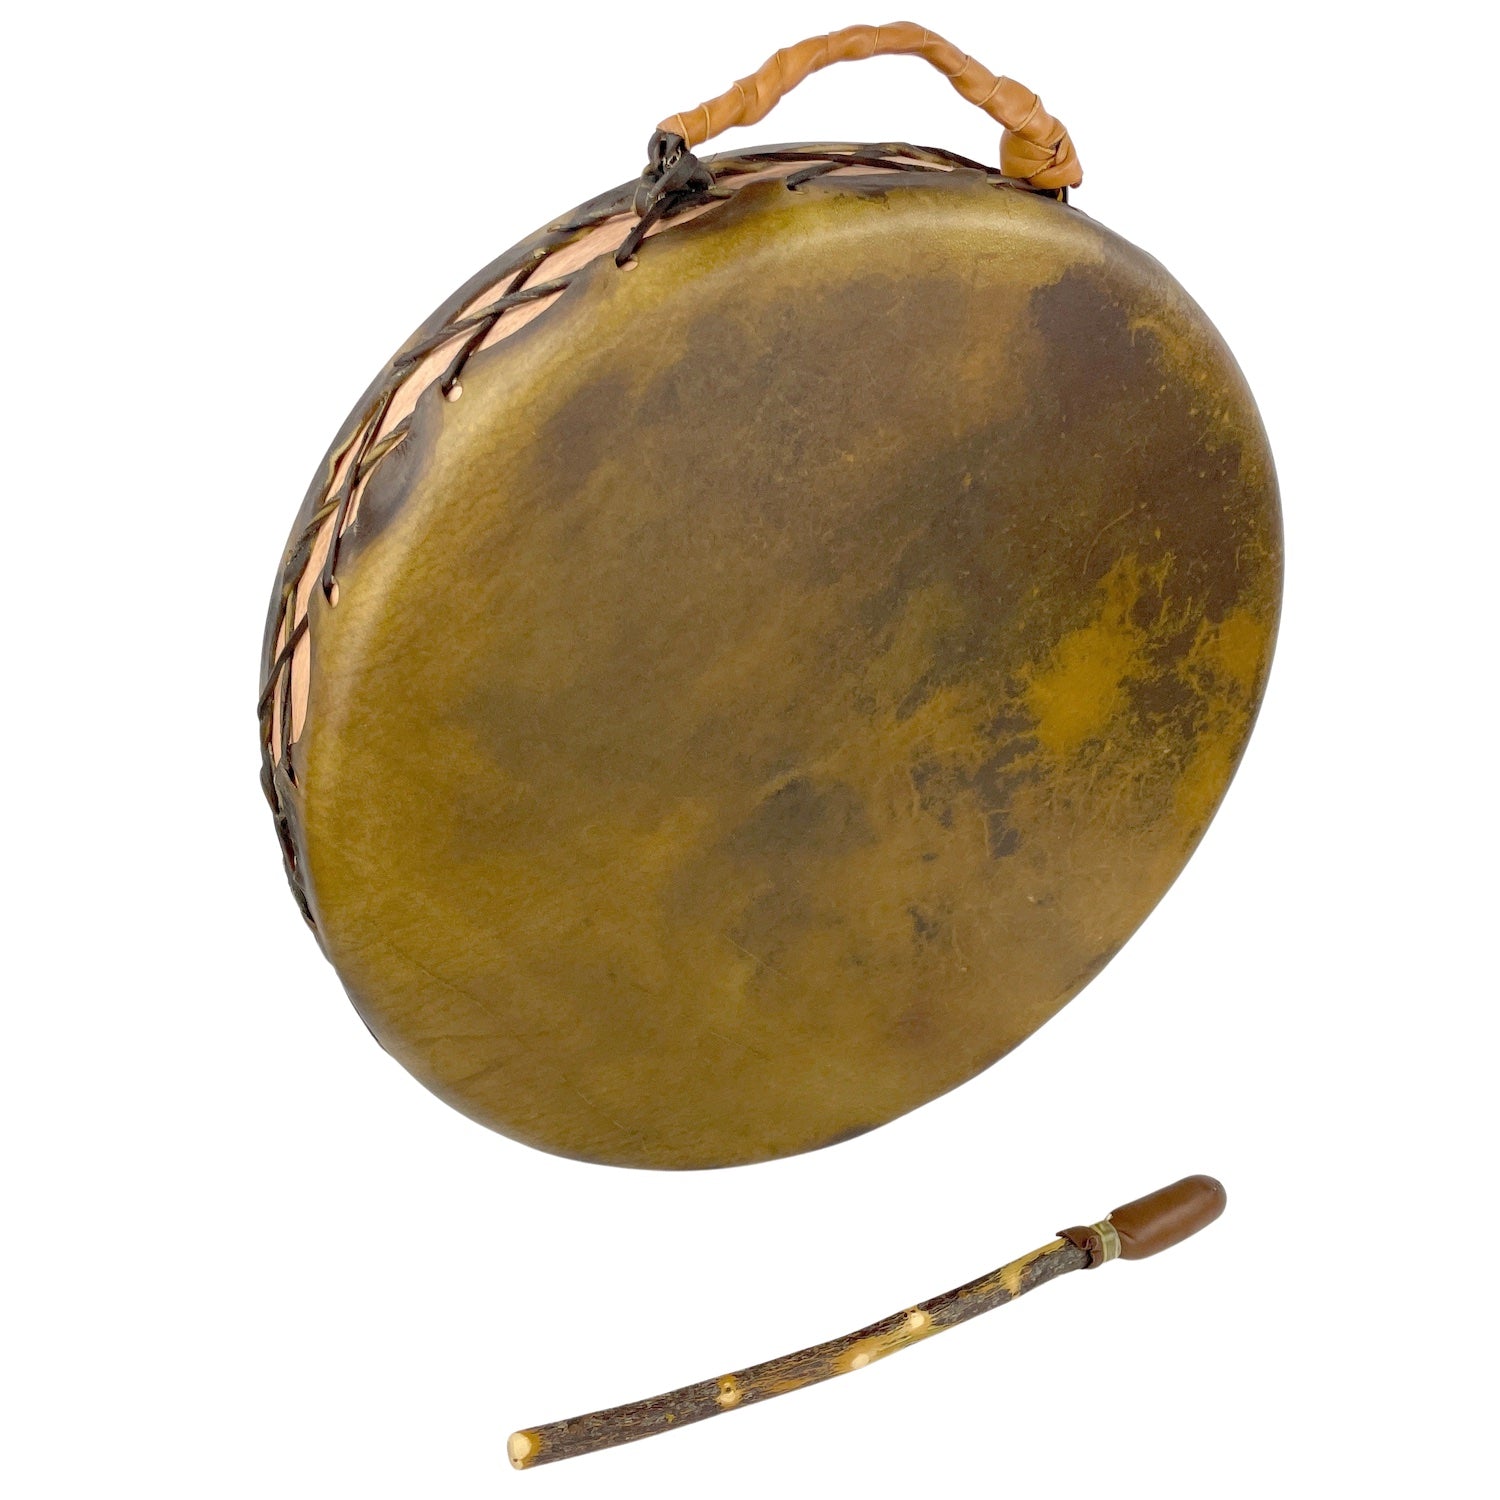 Elk Rawhide Hand Drum, Double-Sided, 18-inch, with Beater, by Nash Tavewa Native American Drums Nash Tavewa   